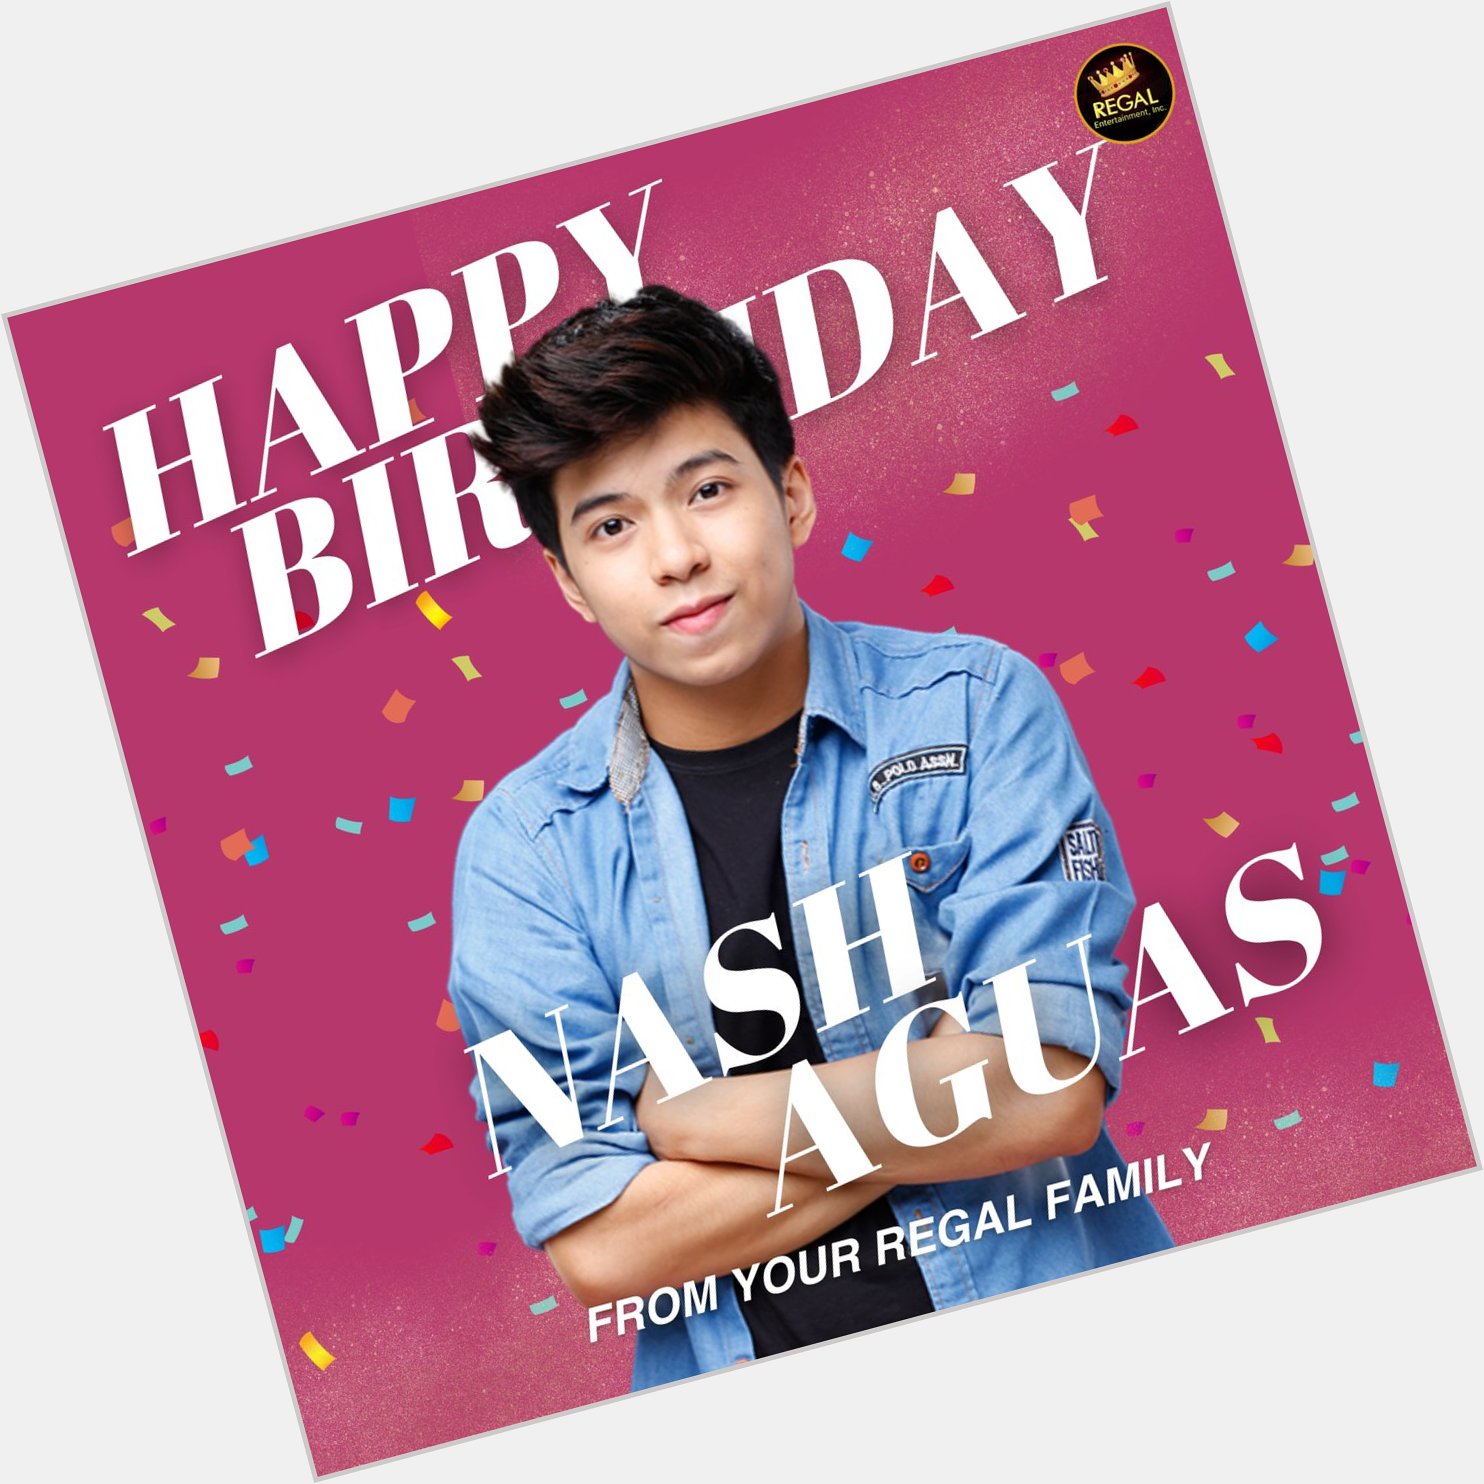 Happy Birthday, Nash Aguas! We wish you all the best in life! From your Regal Family!  